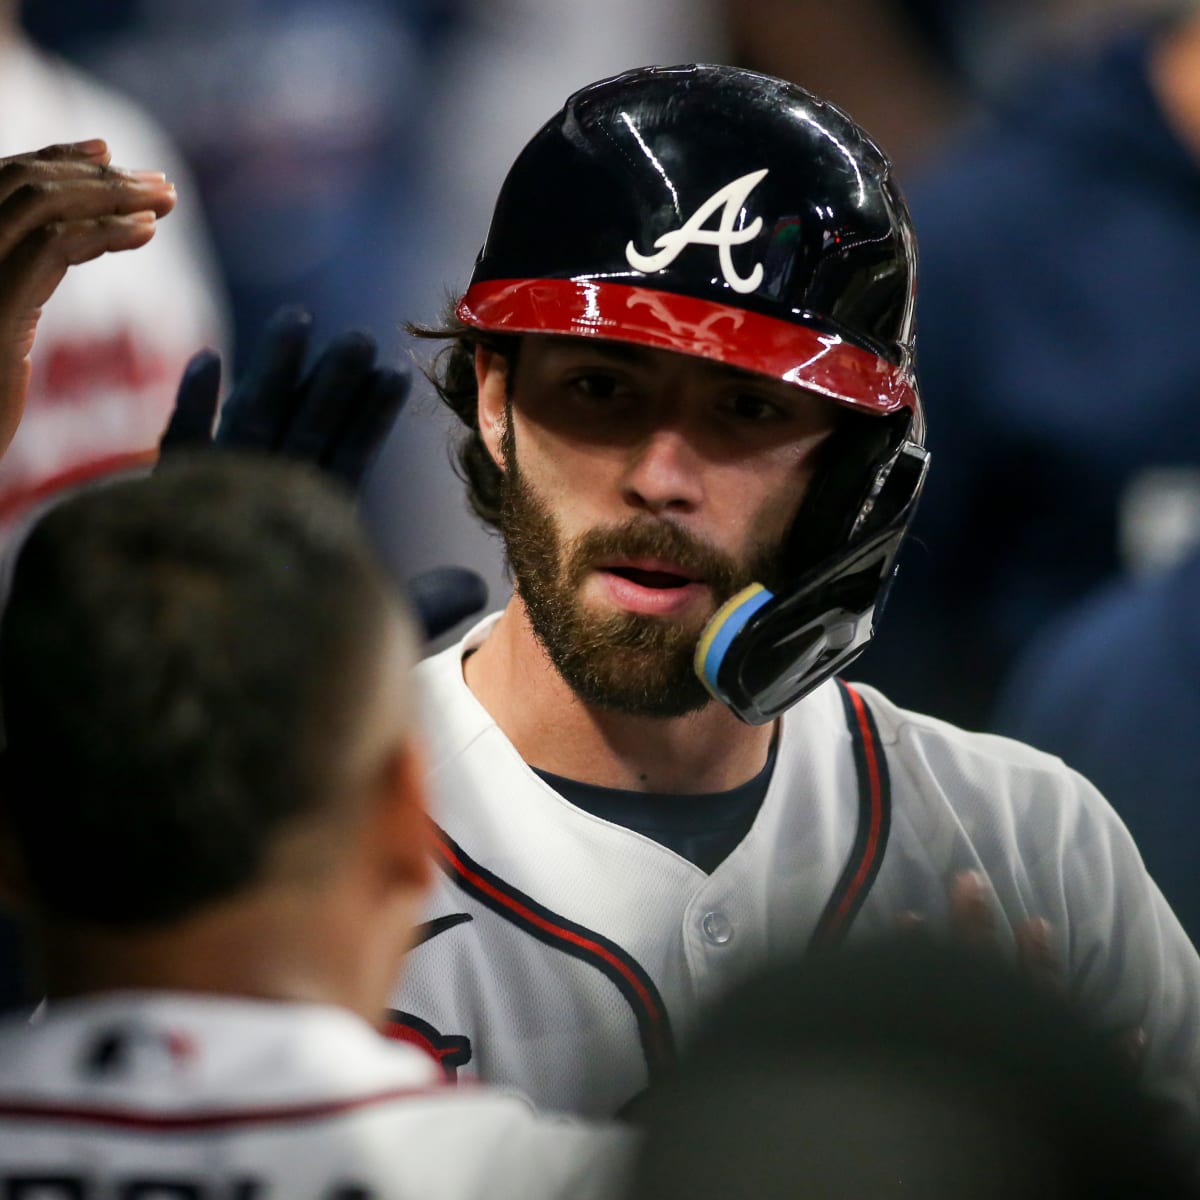 Cubs shortstop Dansby Swanson looks at return to Atlanta as a chance to  'recharge' - Chicago Sun-Times